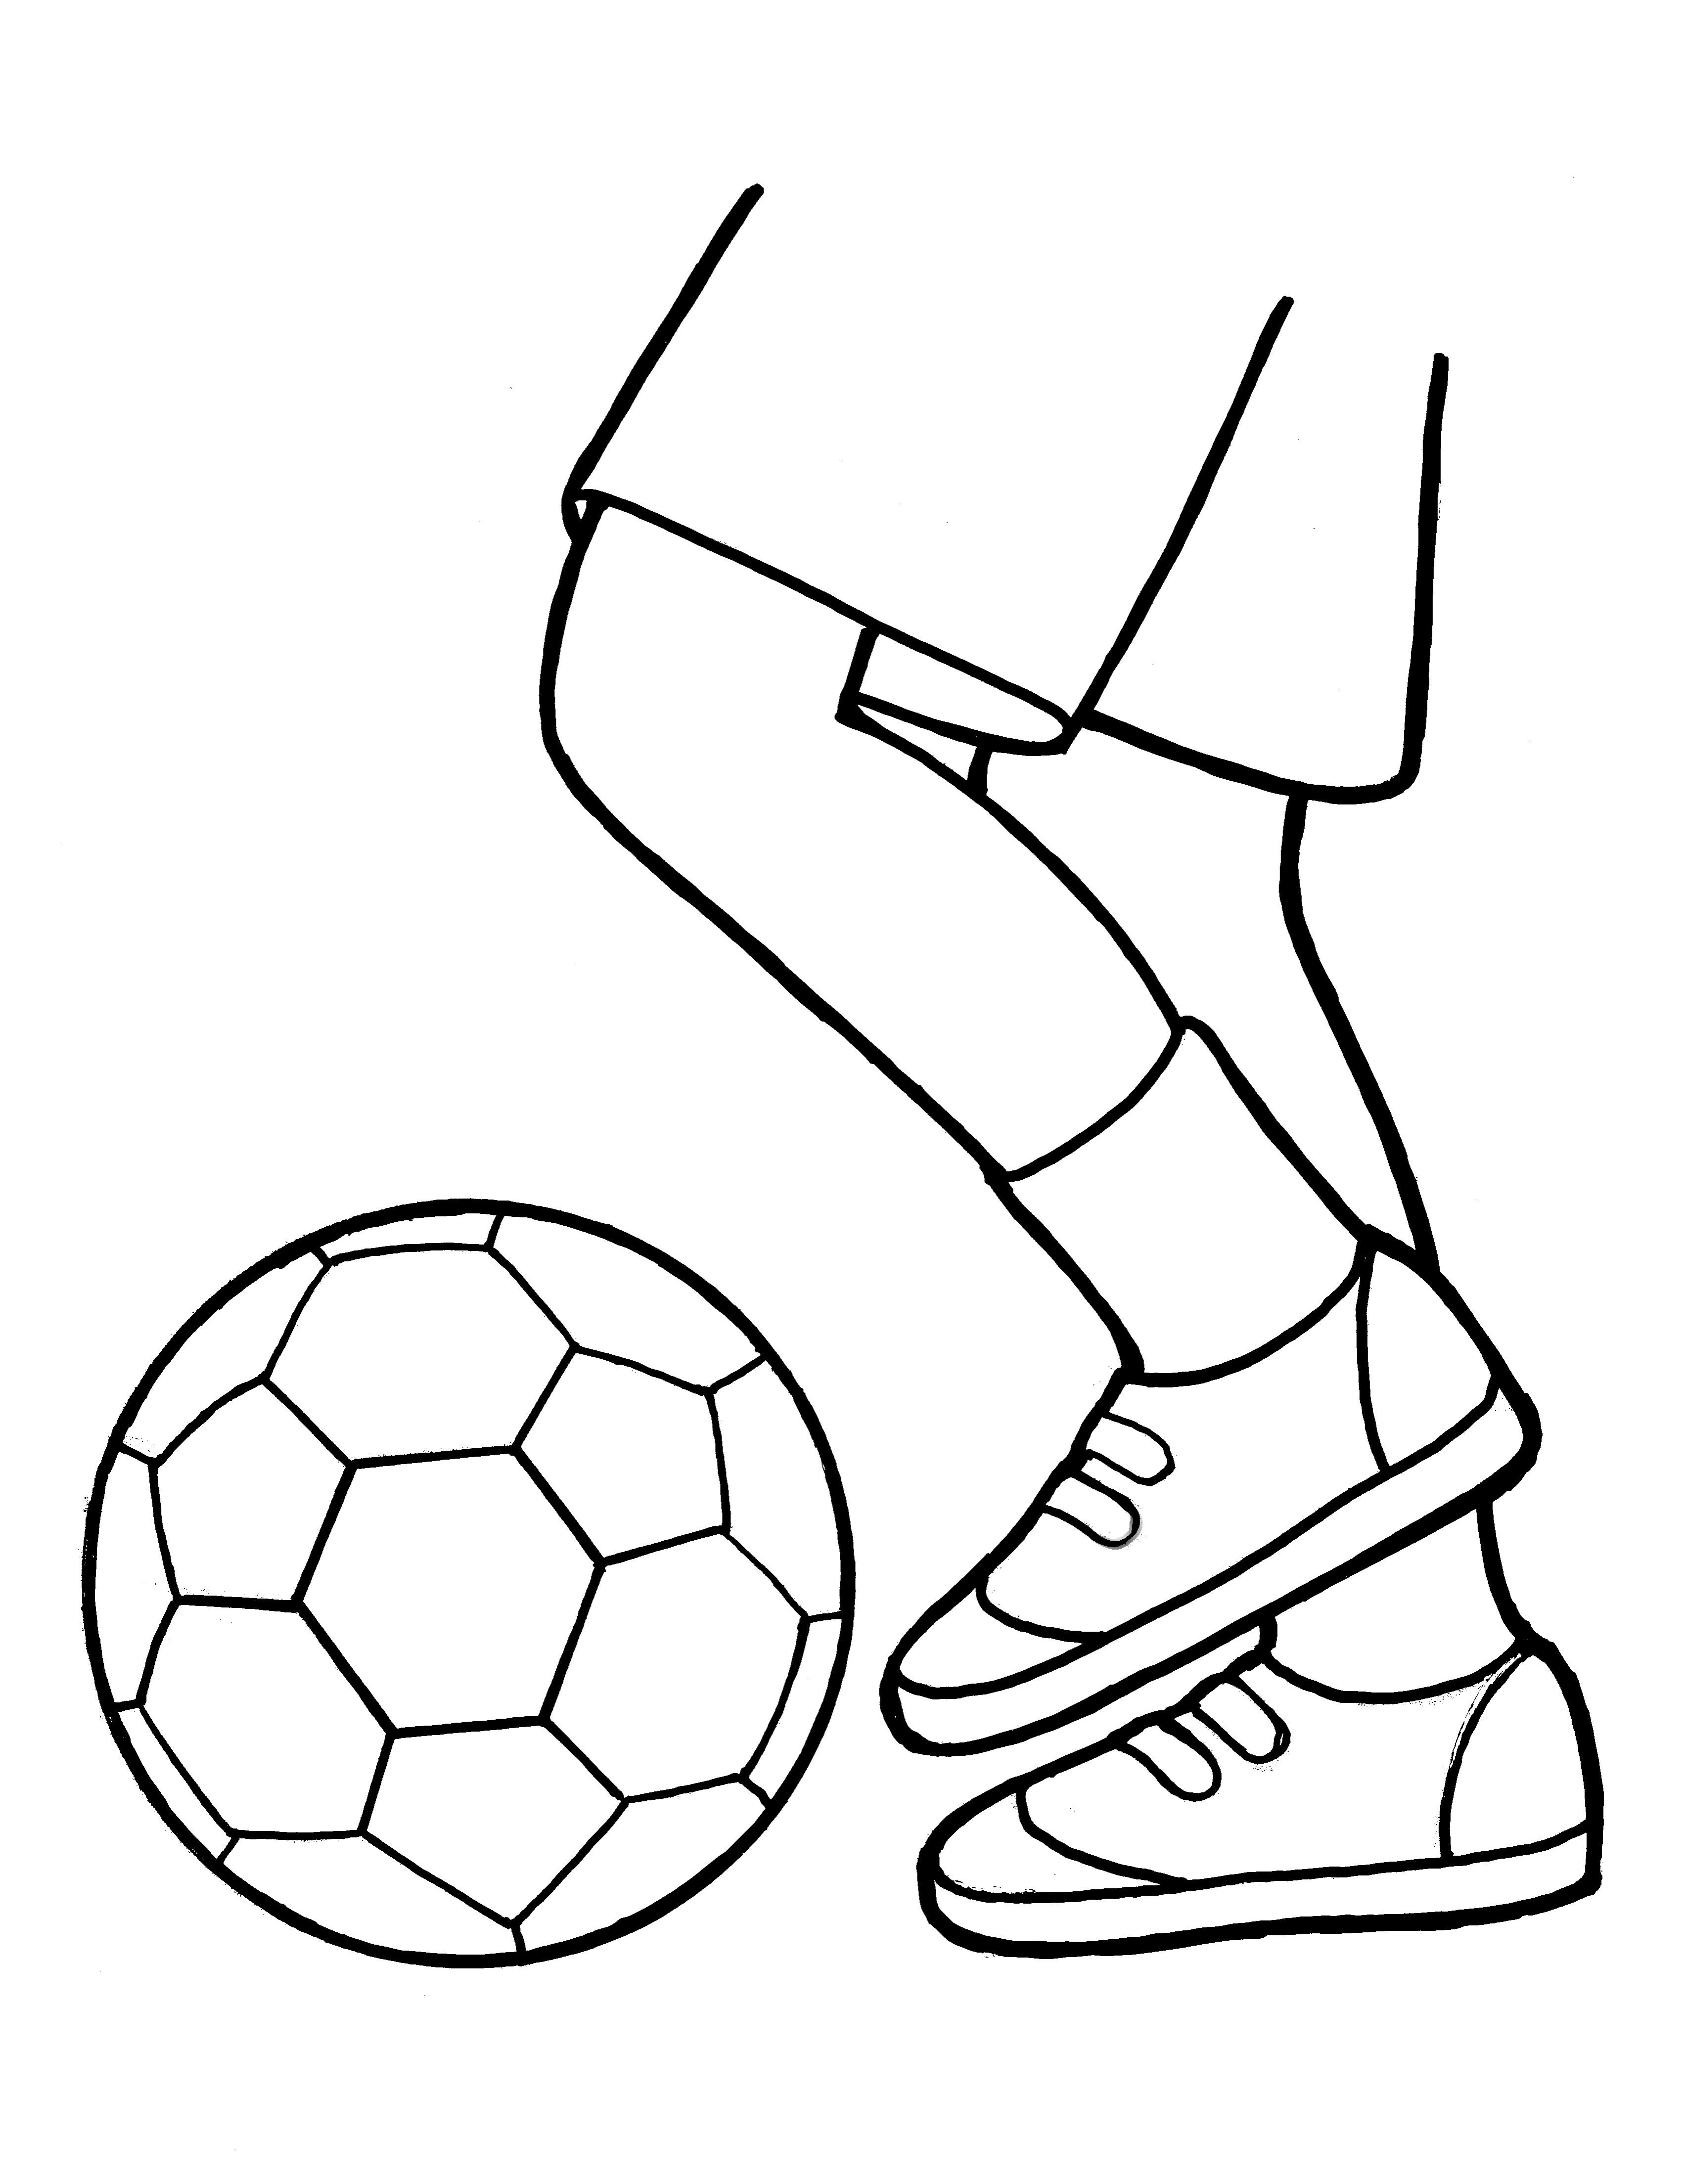 4 Ways How to draw a Soccer Ball and football Step by Step